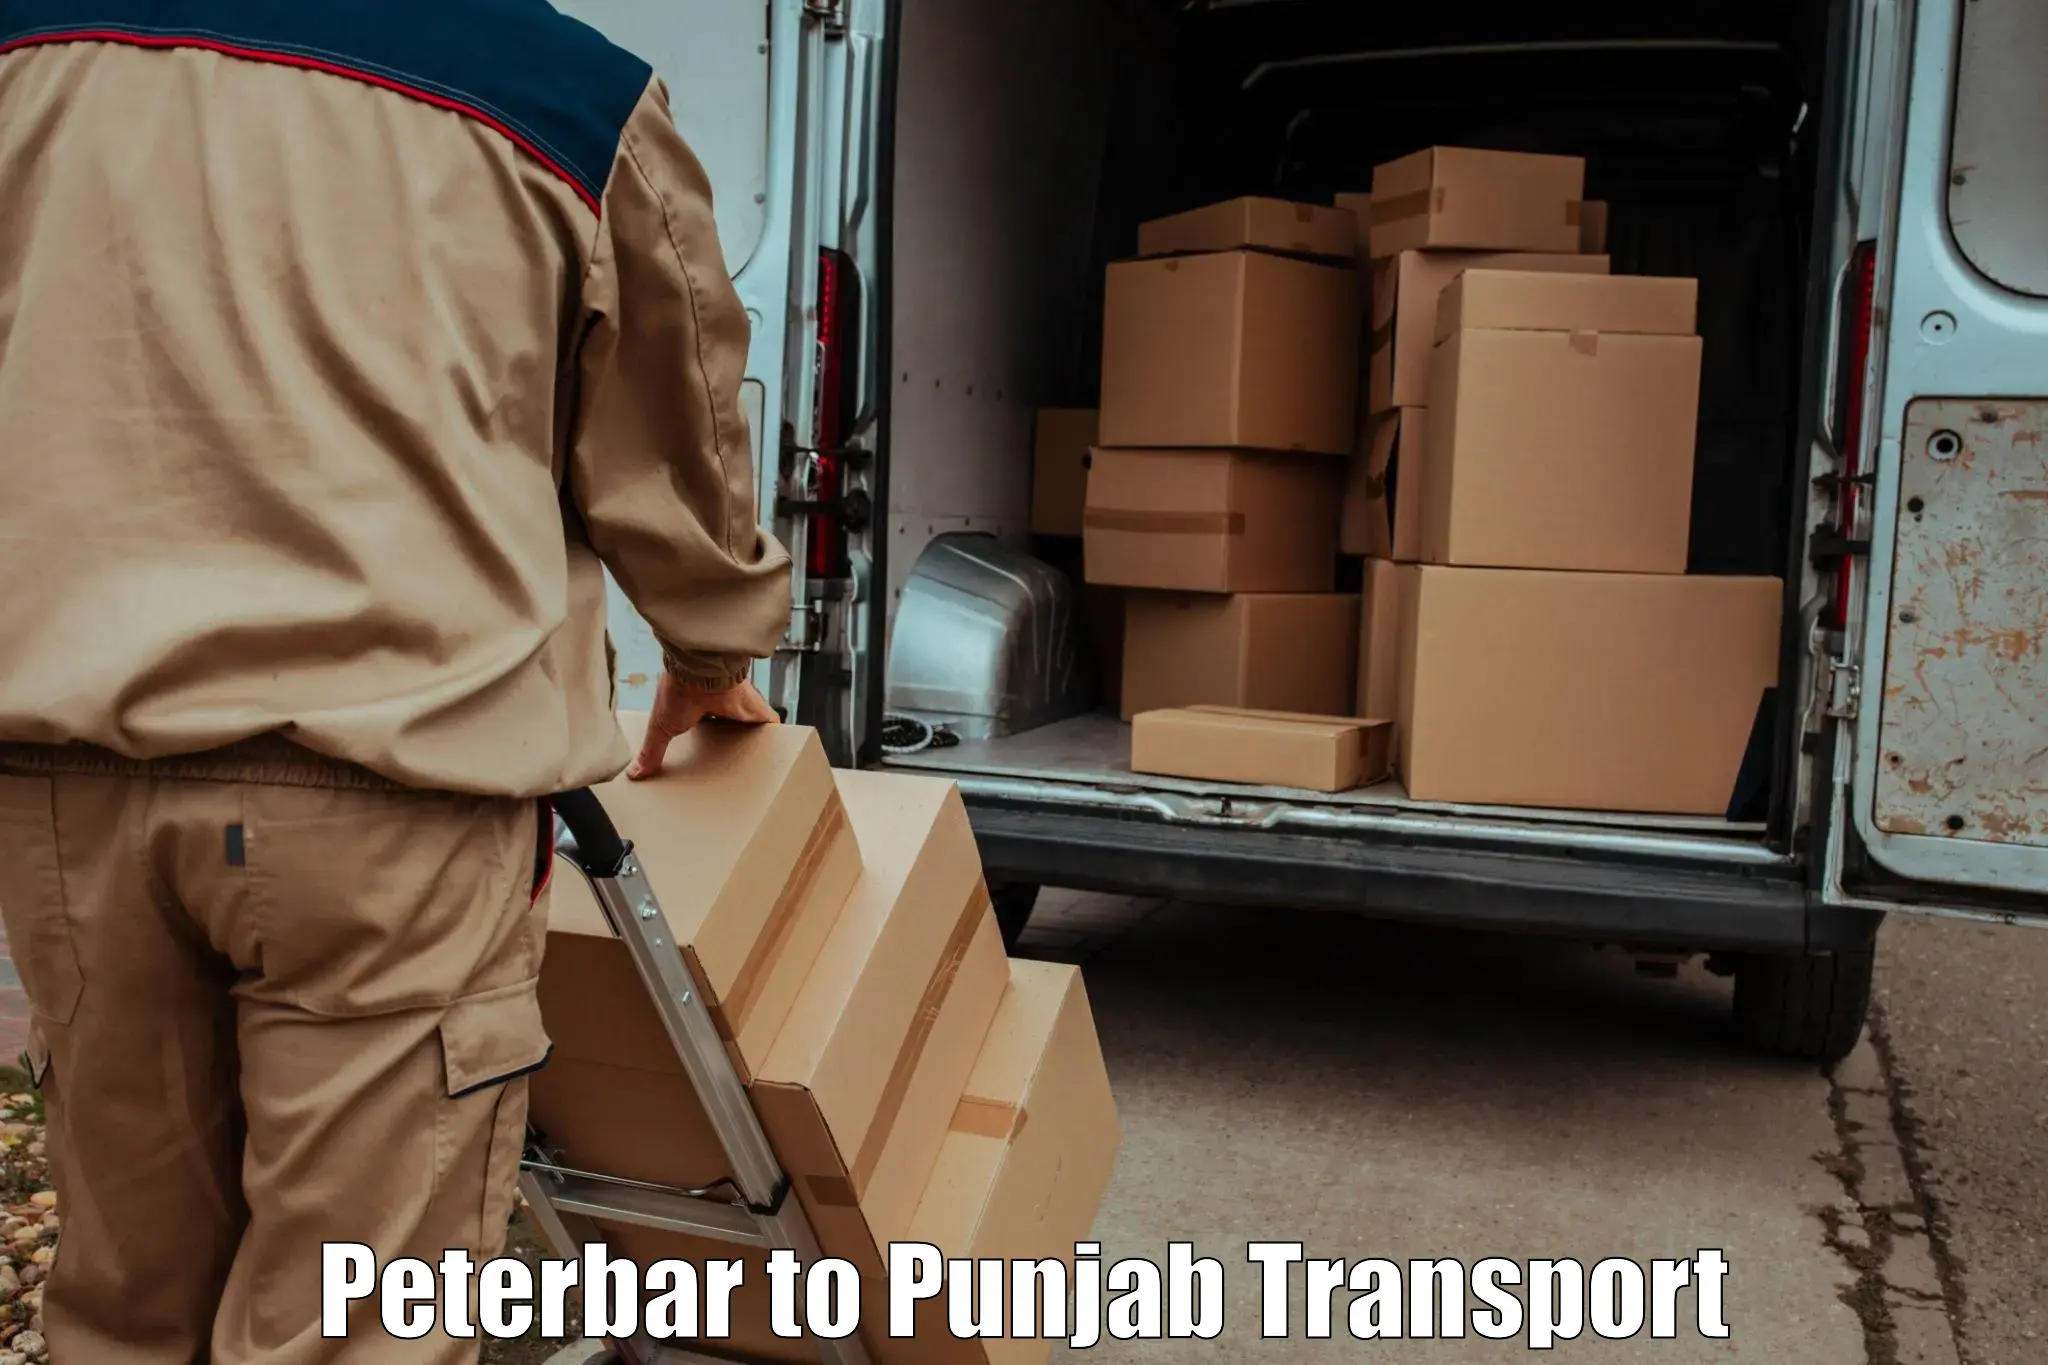 Domestic goods transportation services Peterbar to Sultanpur Lodhi